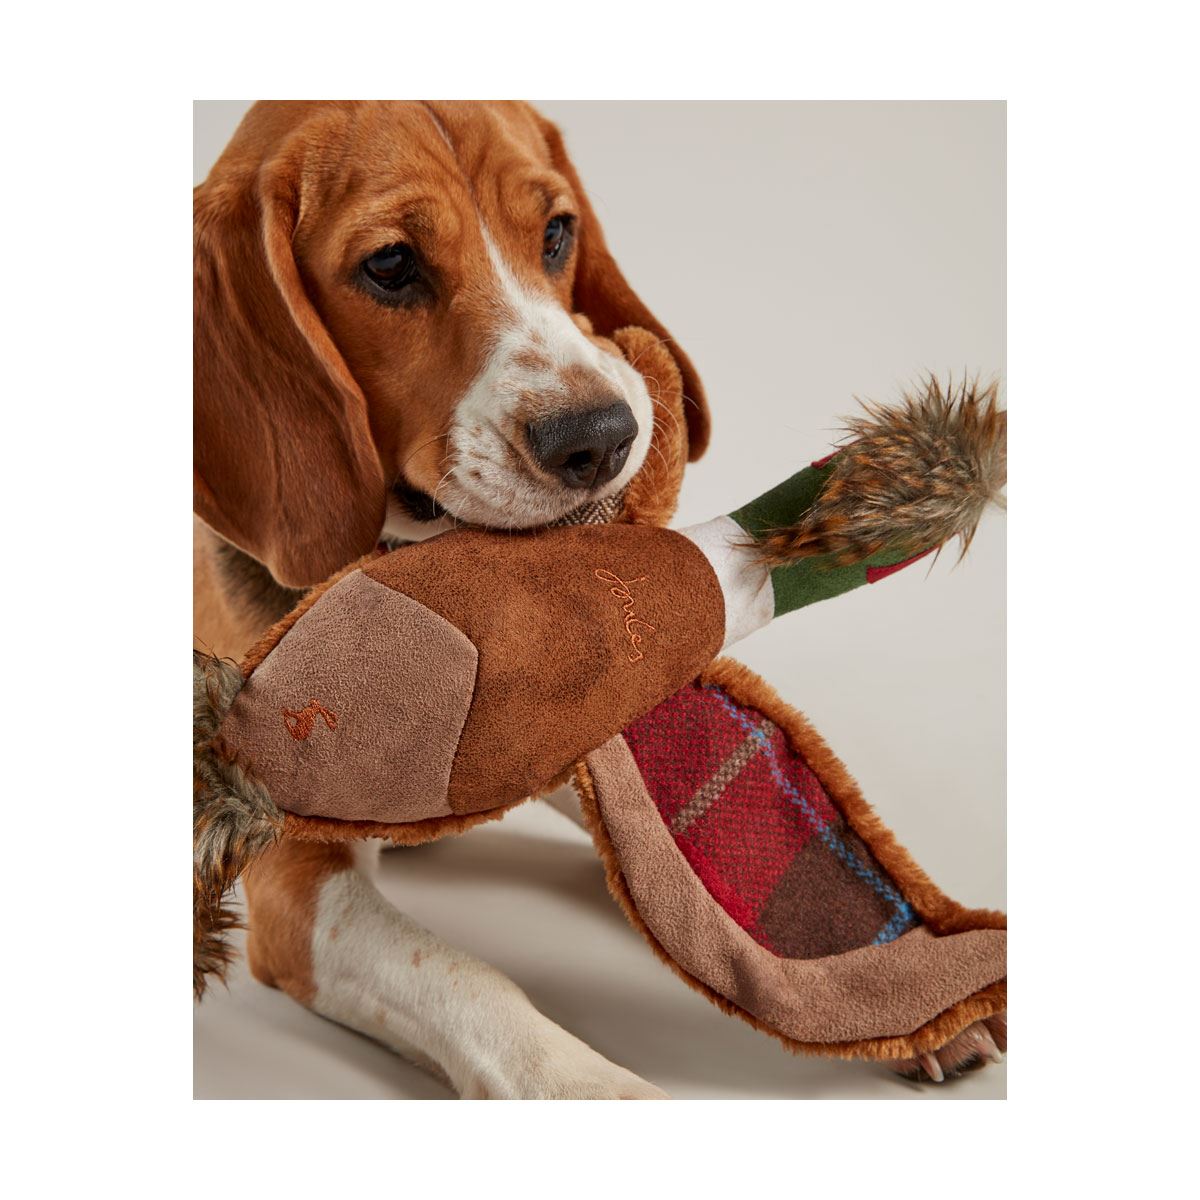 Joules Pheasant Dog Toy - Just Horse Riders